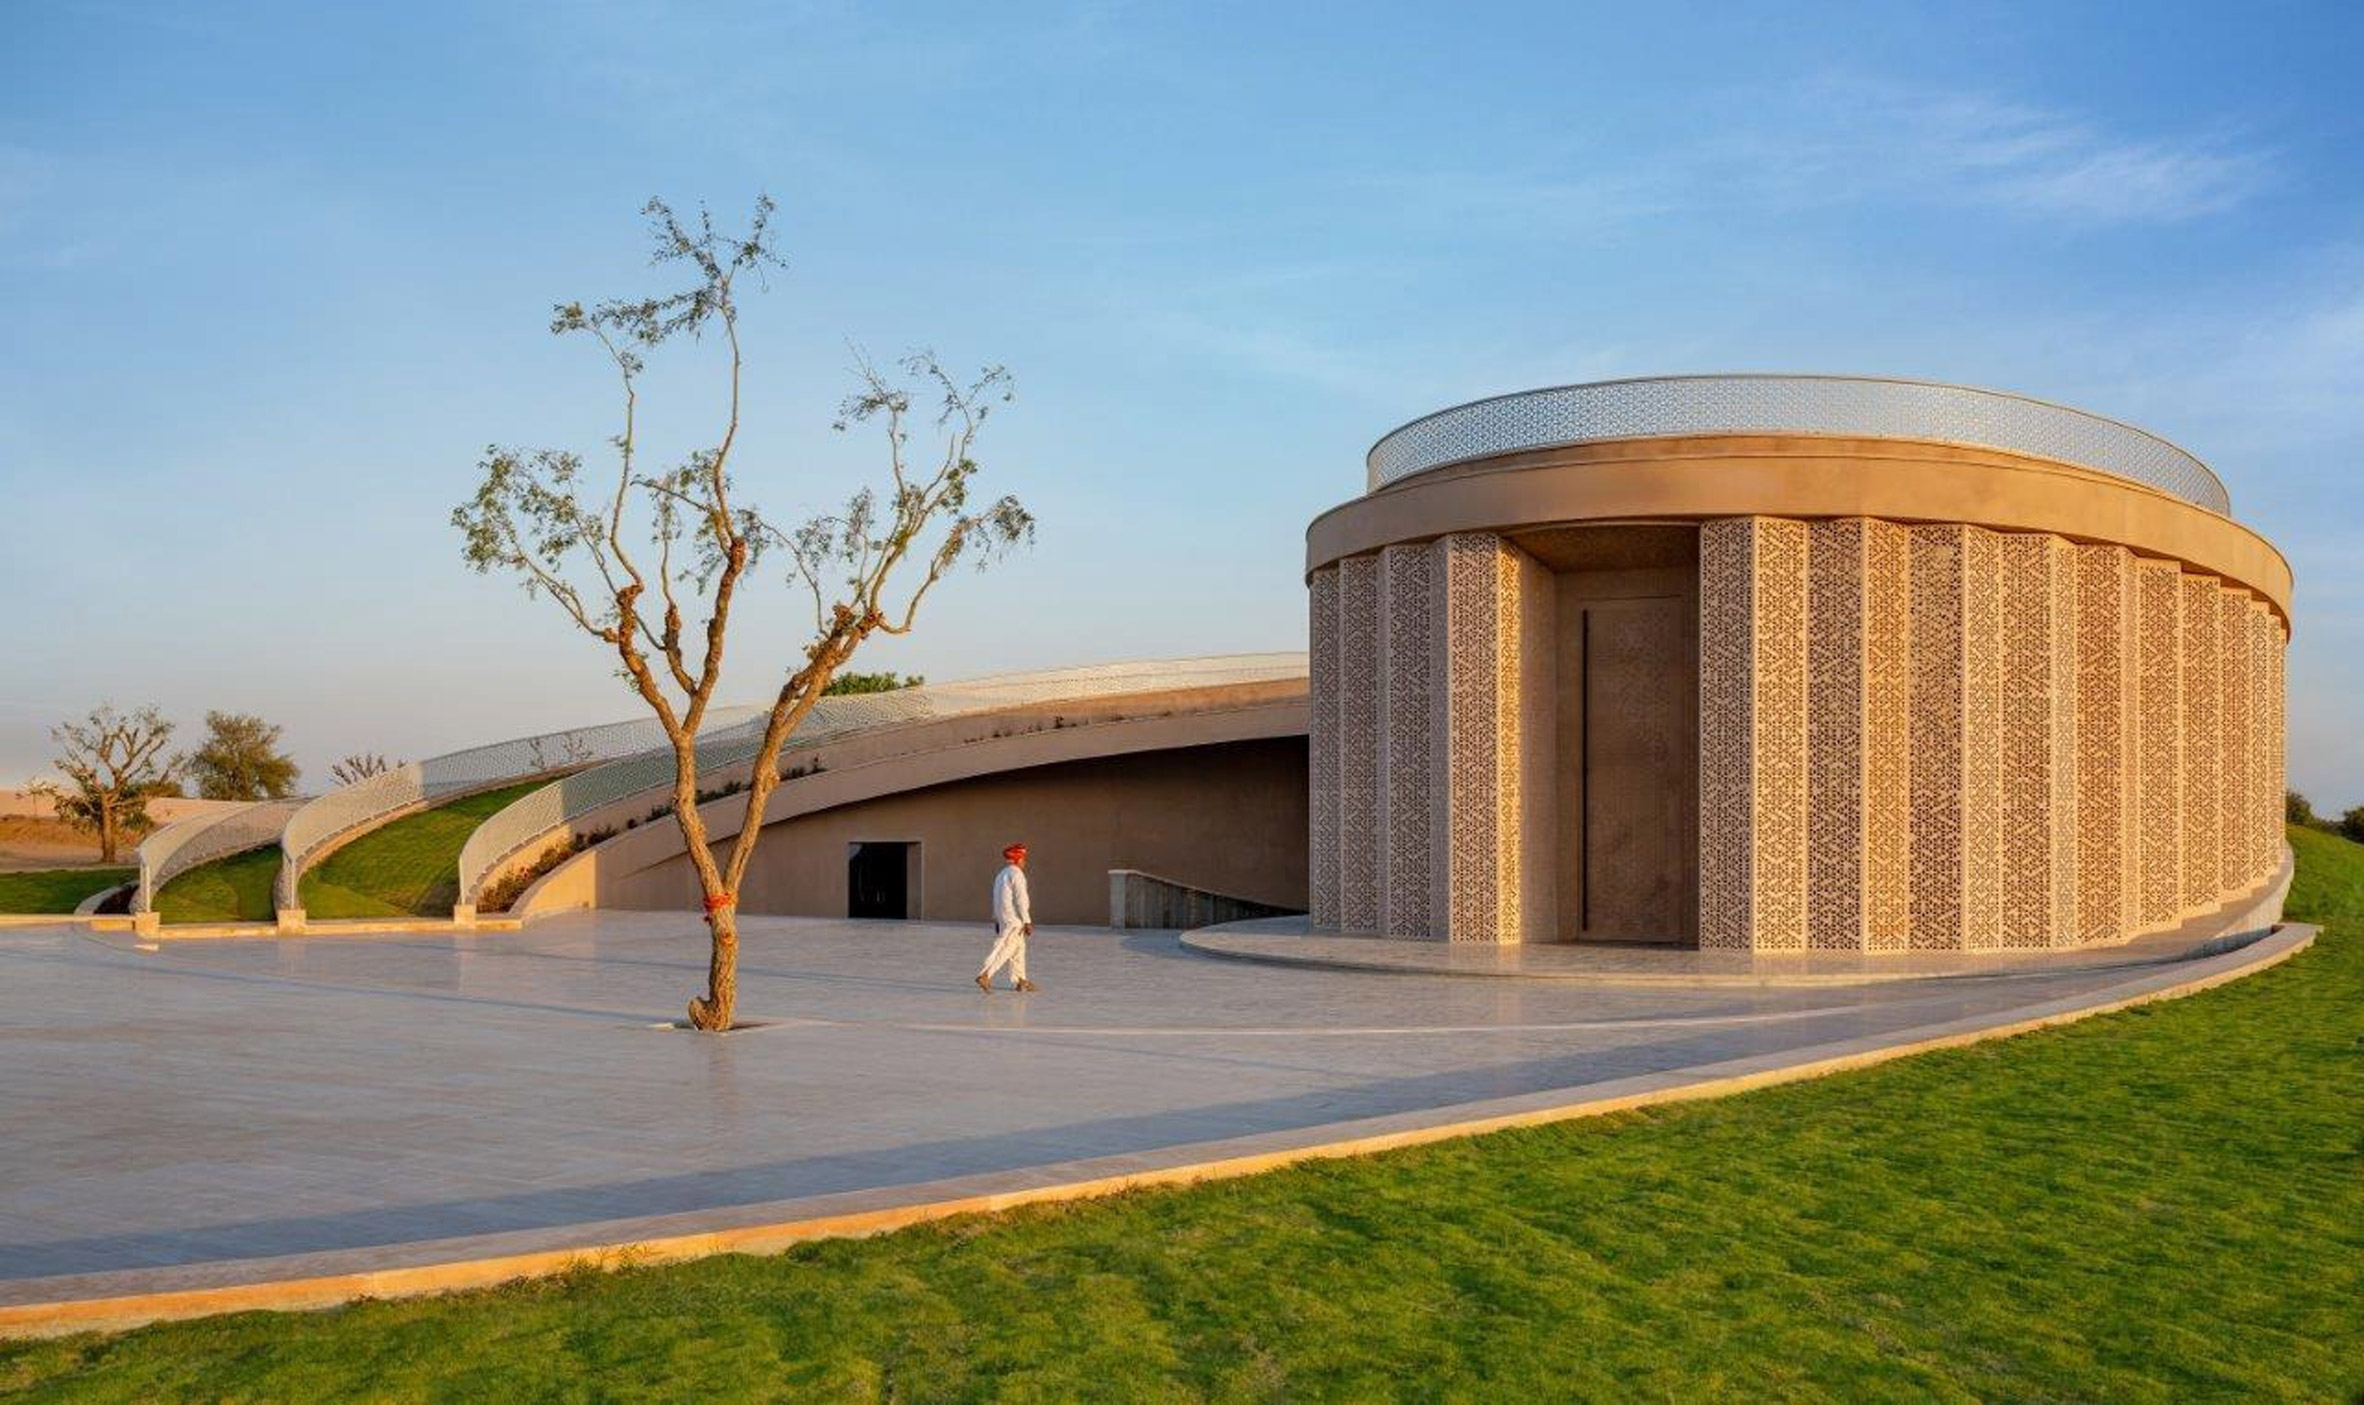 Perforated sandstone facade of Nokha Village Community Centre by Sanjay Puri Architects in India